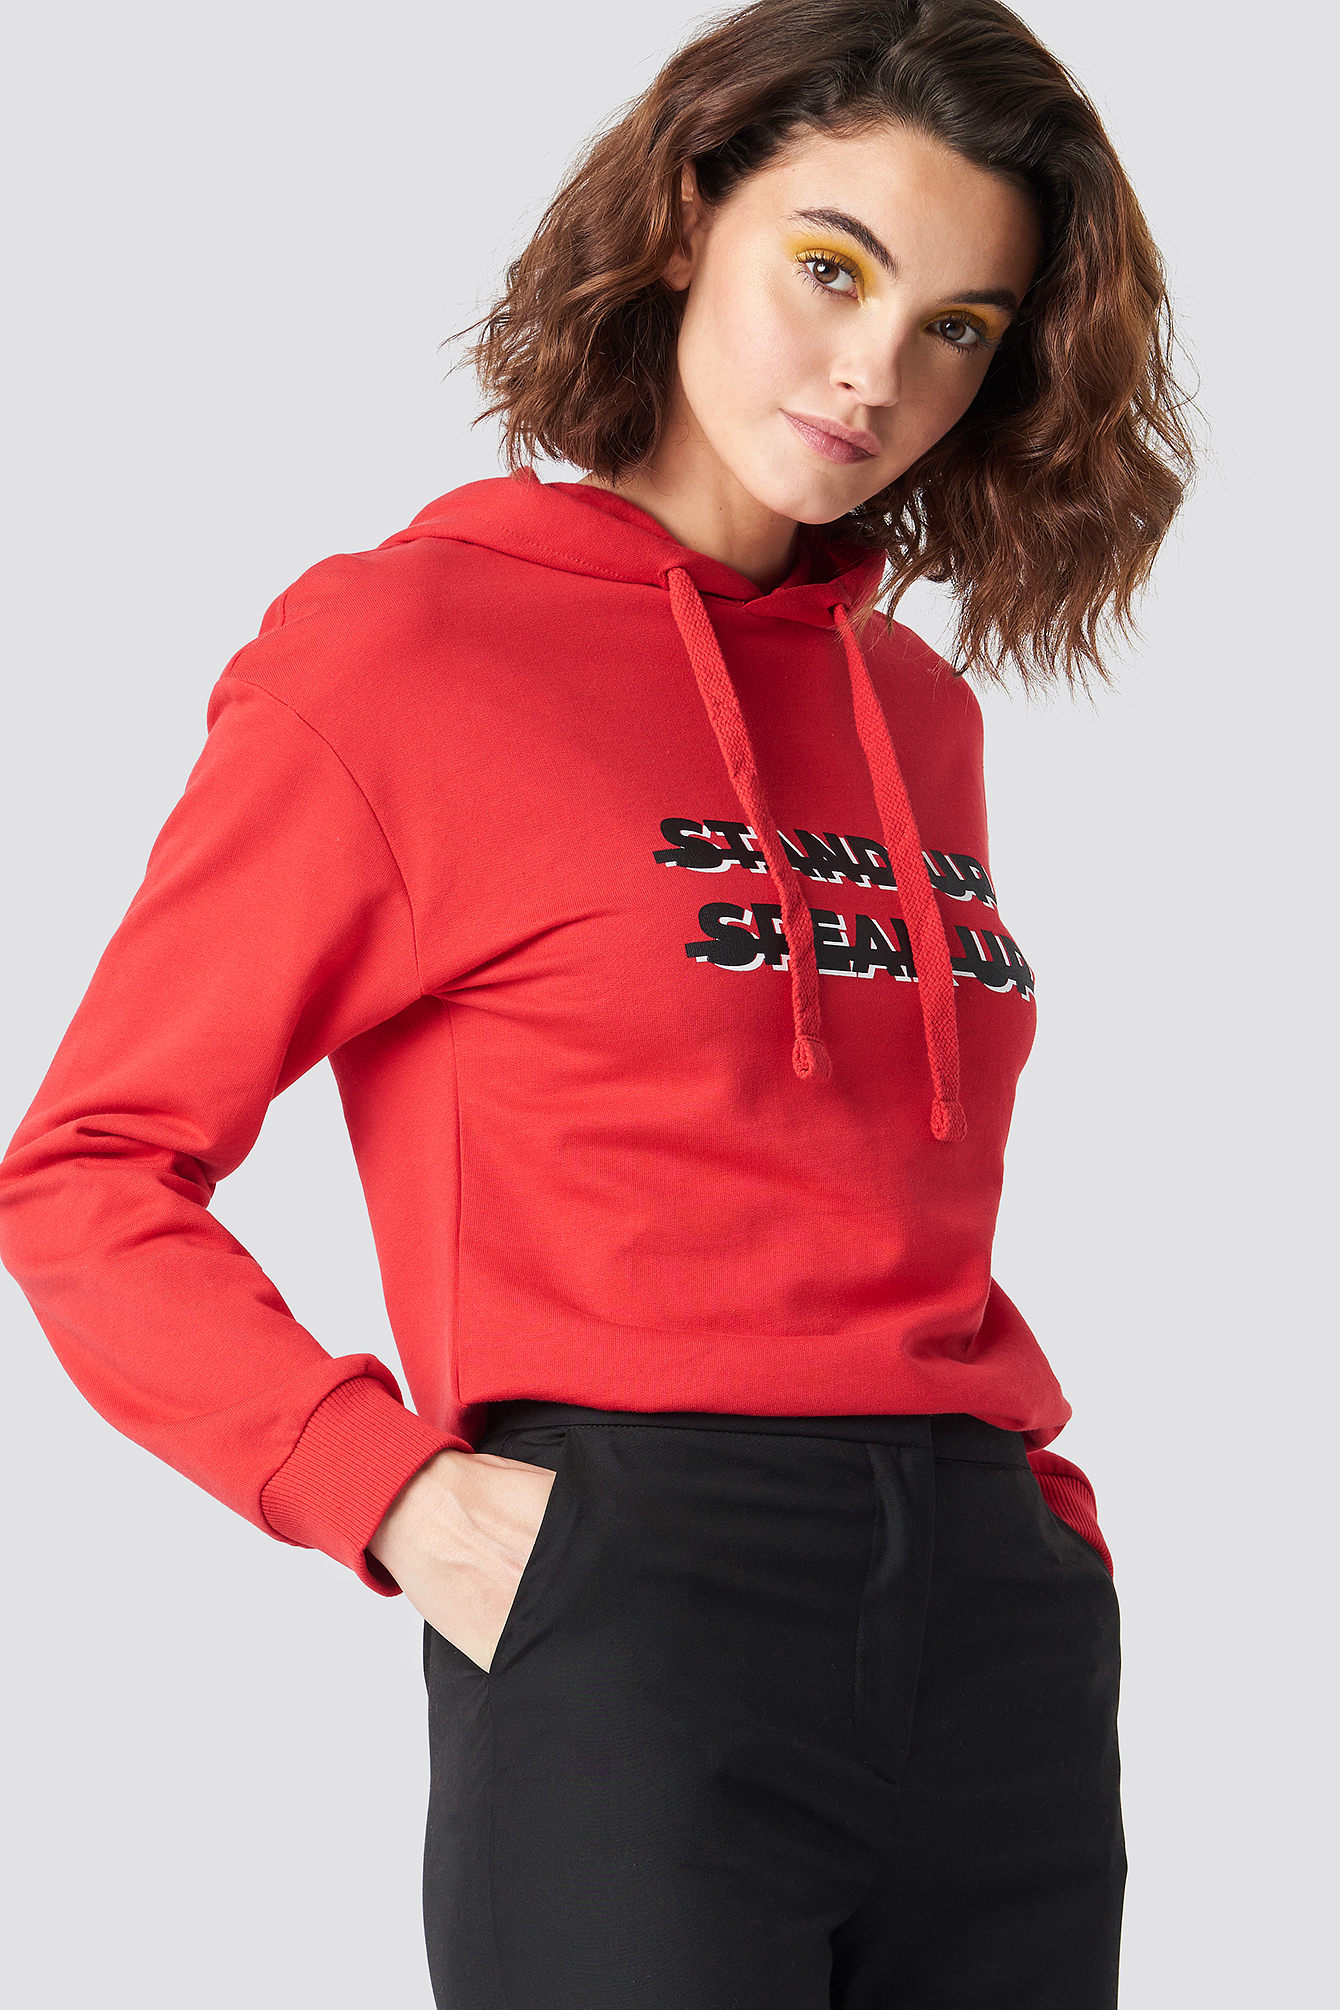 Red Emilie Briting x NA-KD Stand Up Hoodie